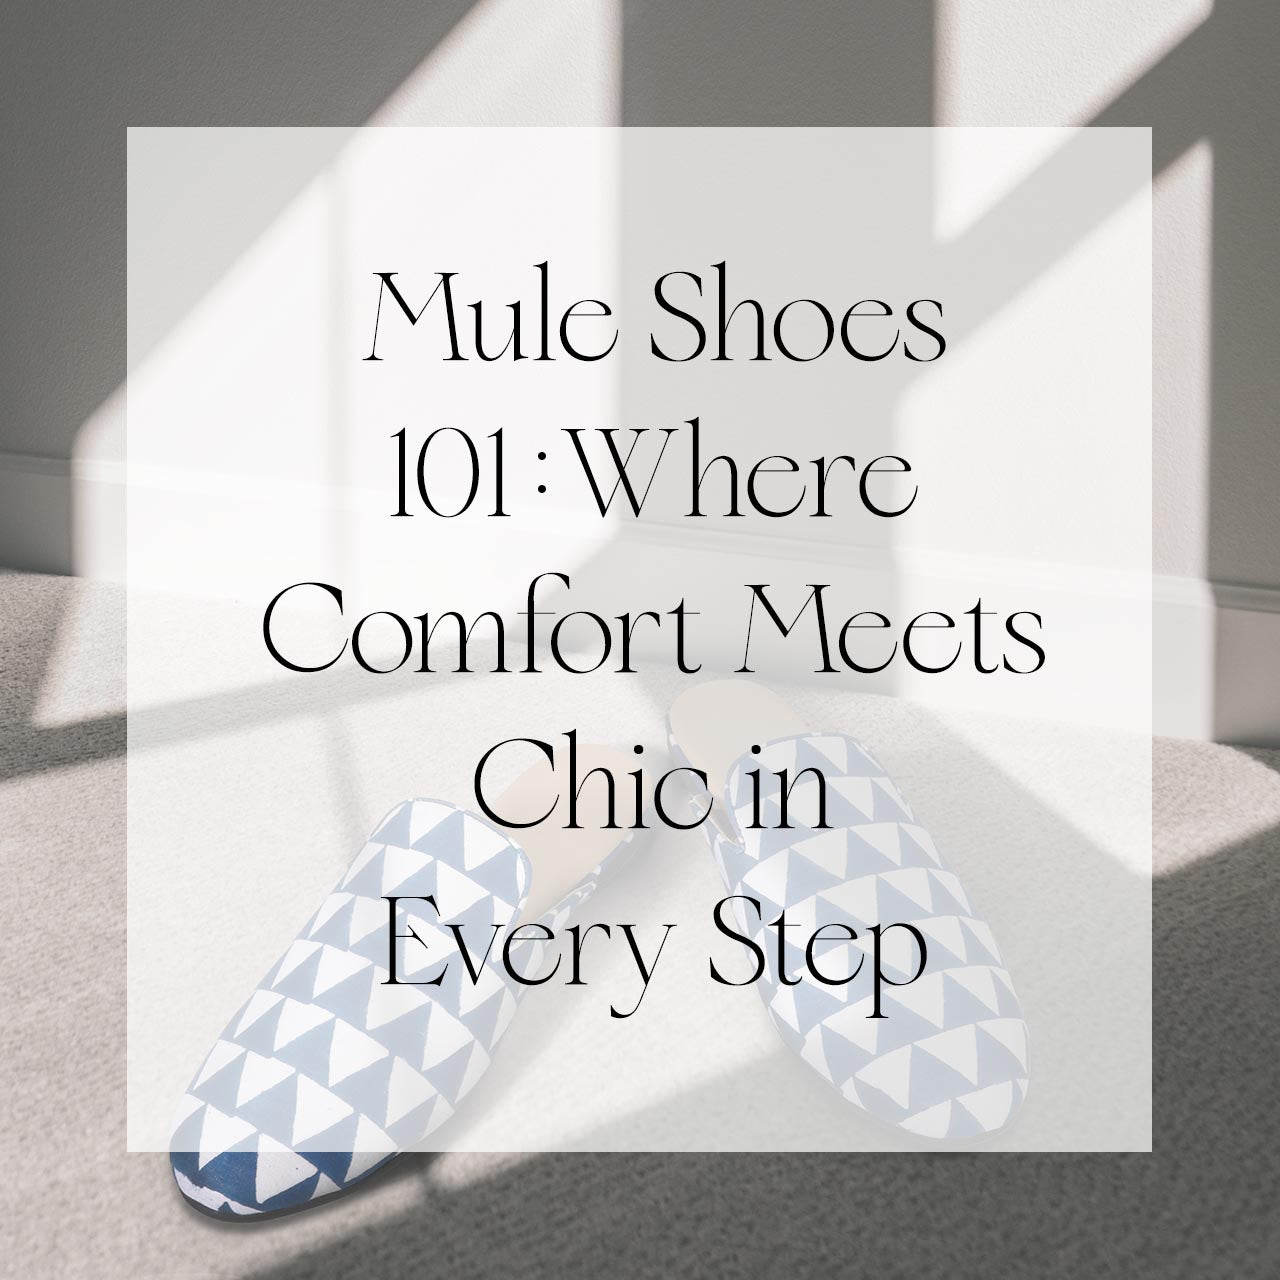 Mule Shoes 101: Where Comfort Meets Chic in Every Step